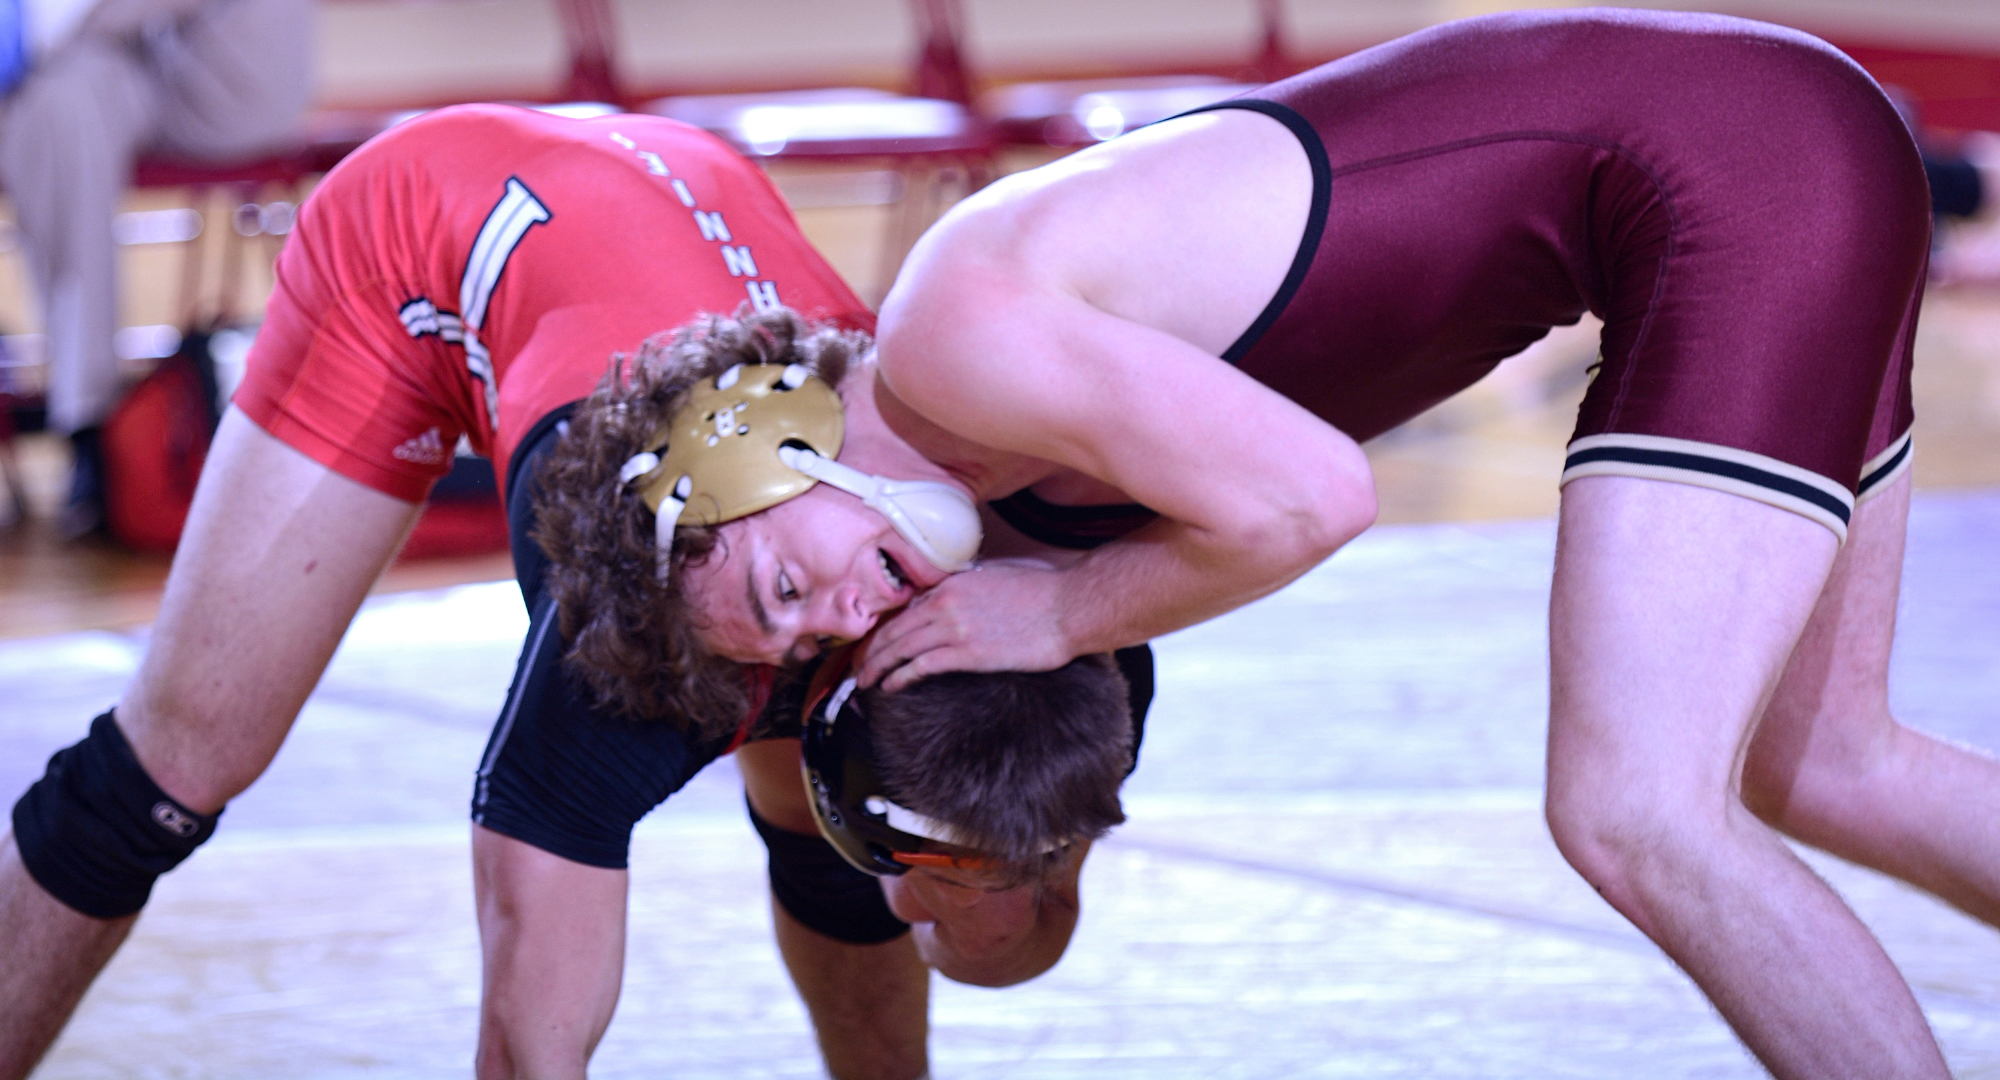 Sophomore Ty Johnson scored a pin fall in his match at 149 to help Concordia beat St. John's 33-13.